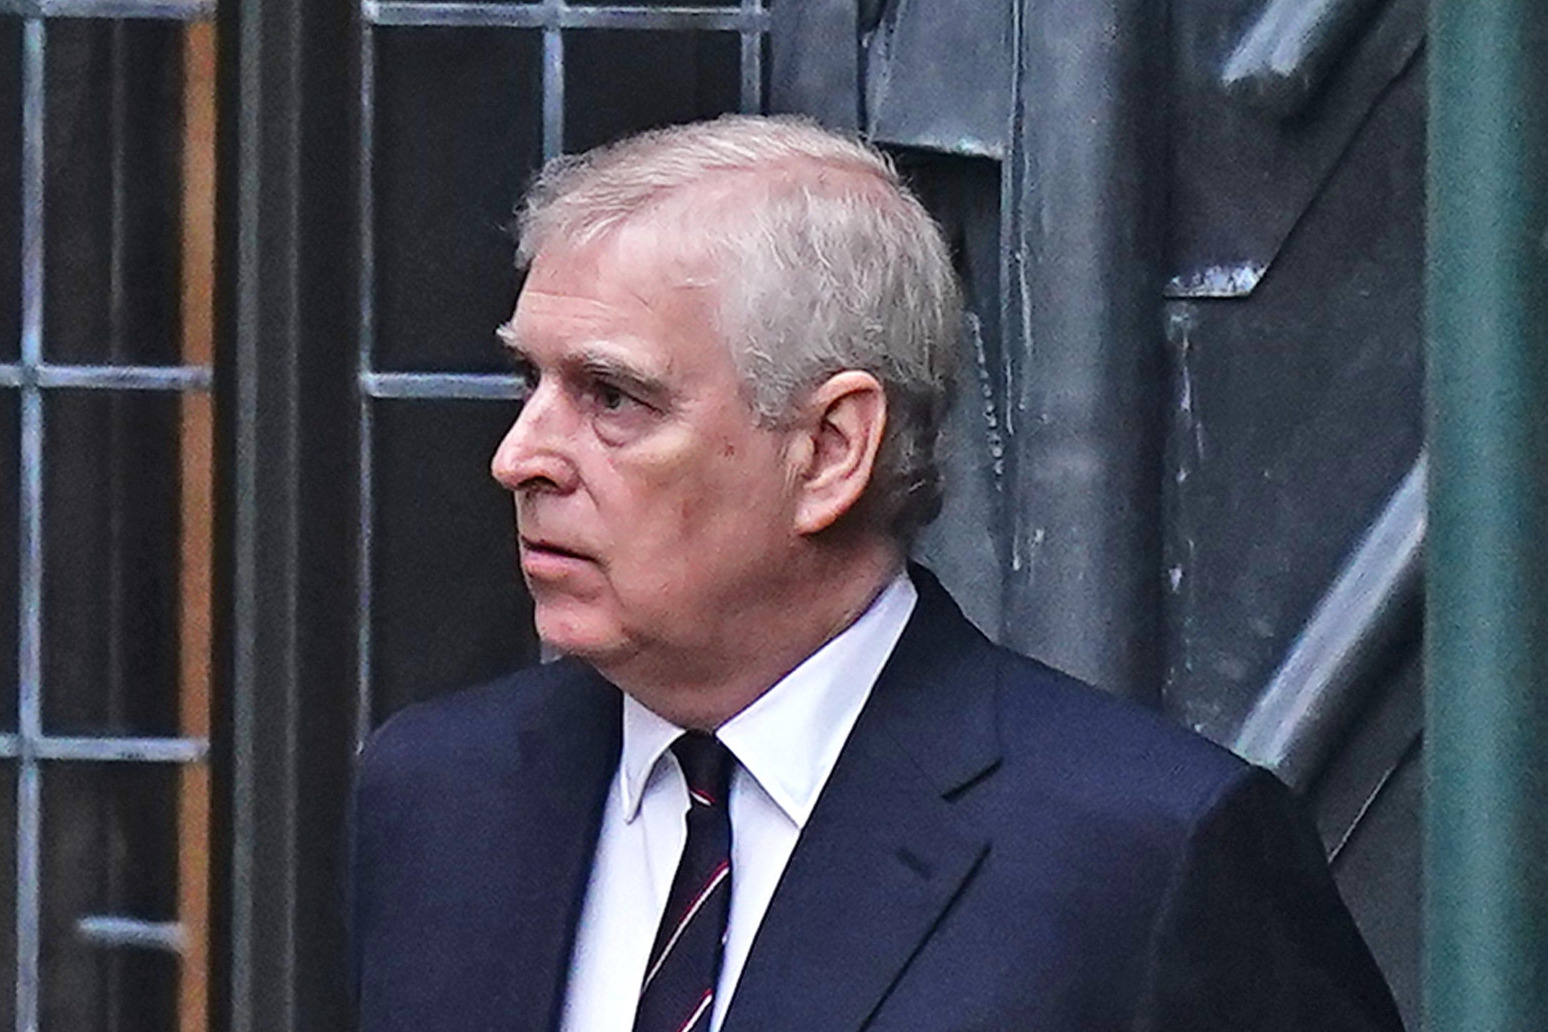 The Duke of York has tested positive for Covid 